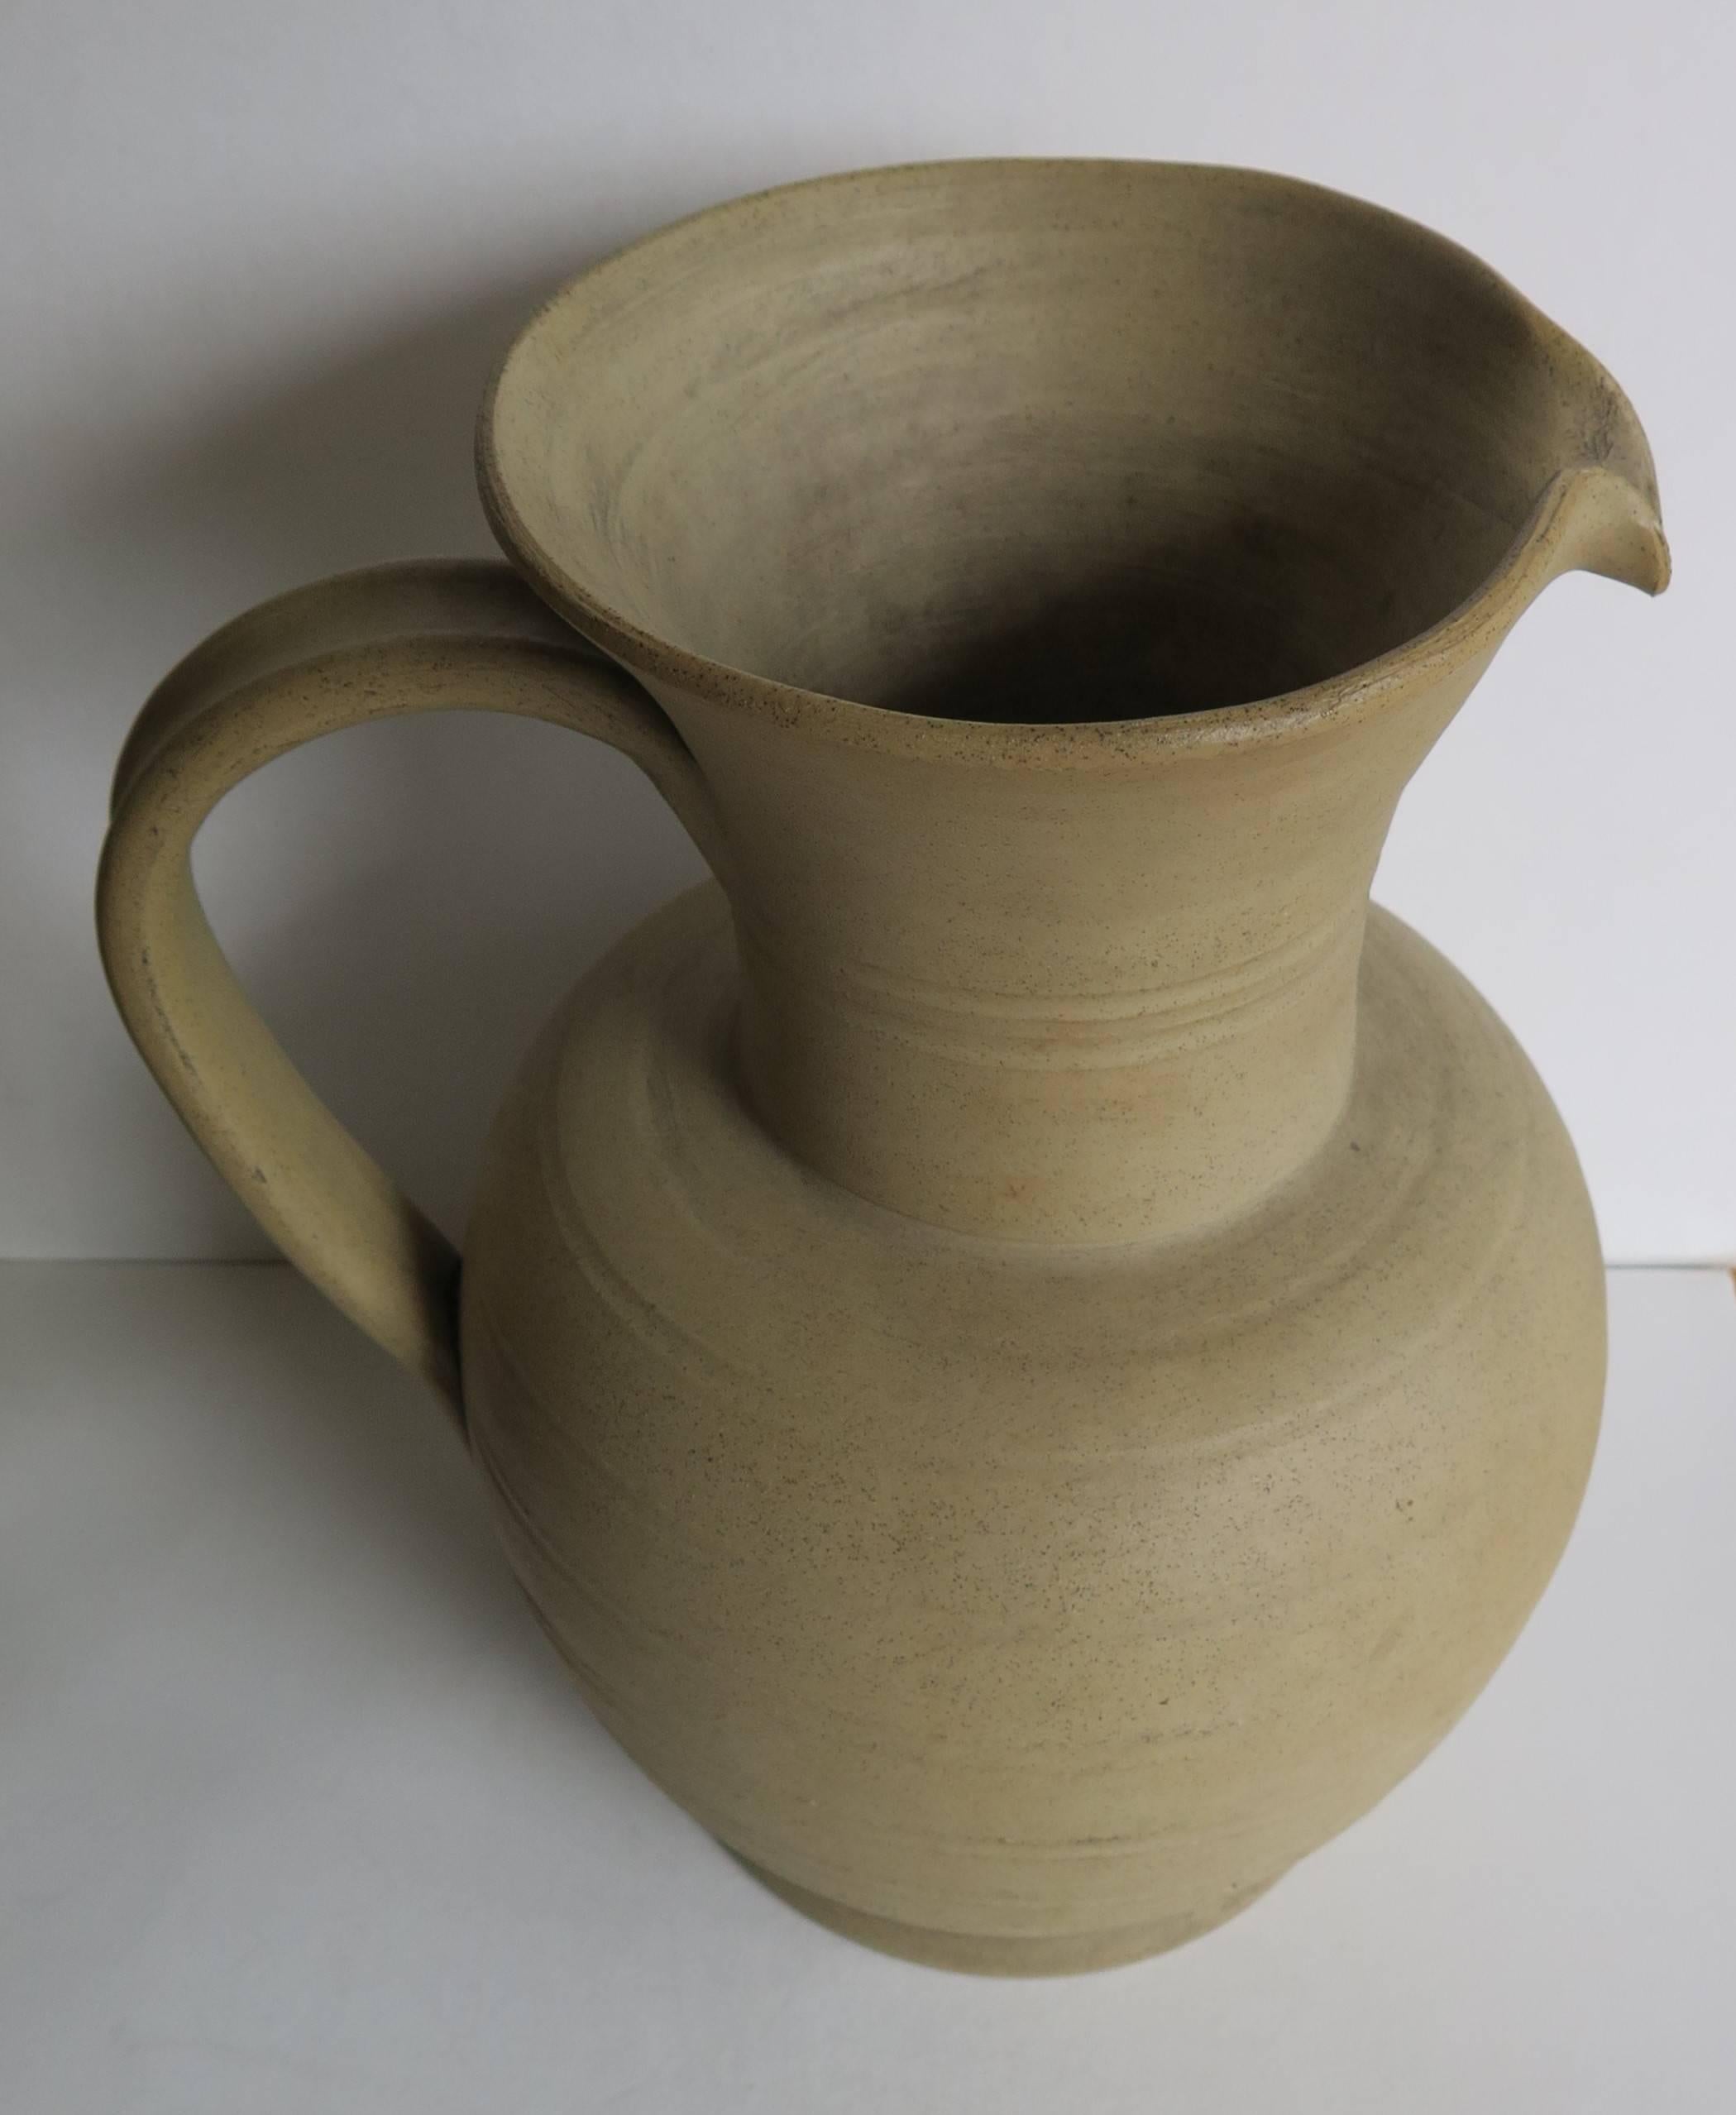 is hillstonia pottery valuable